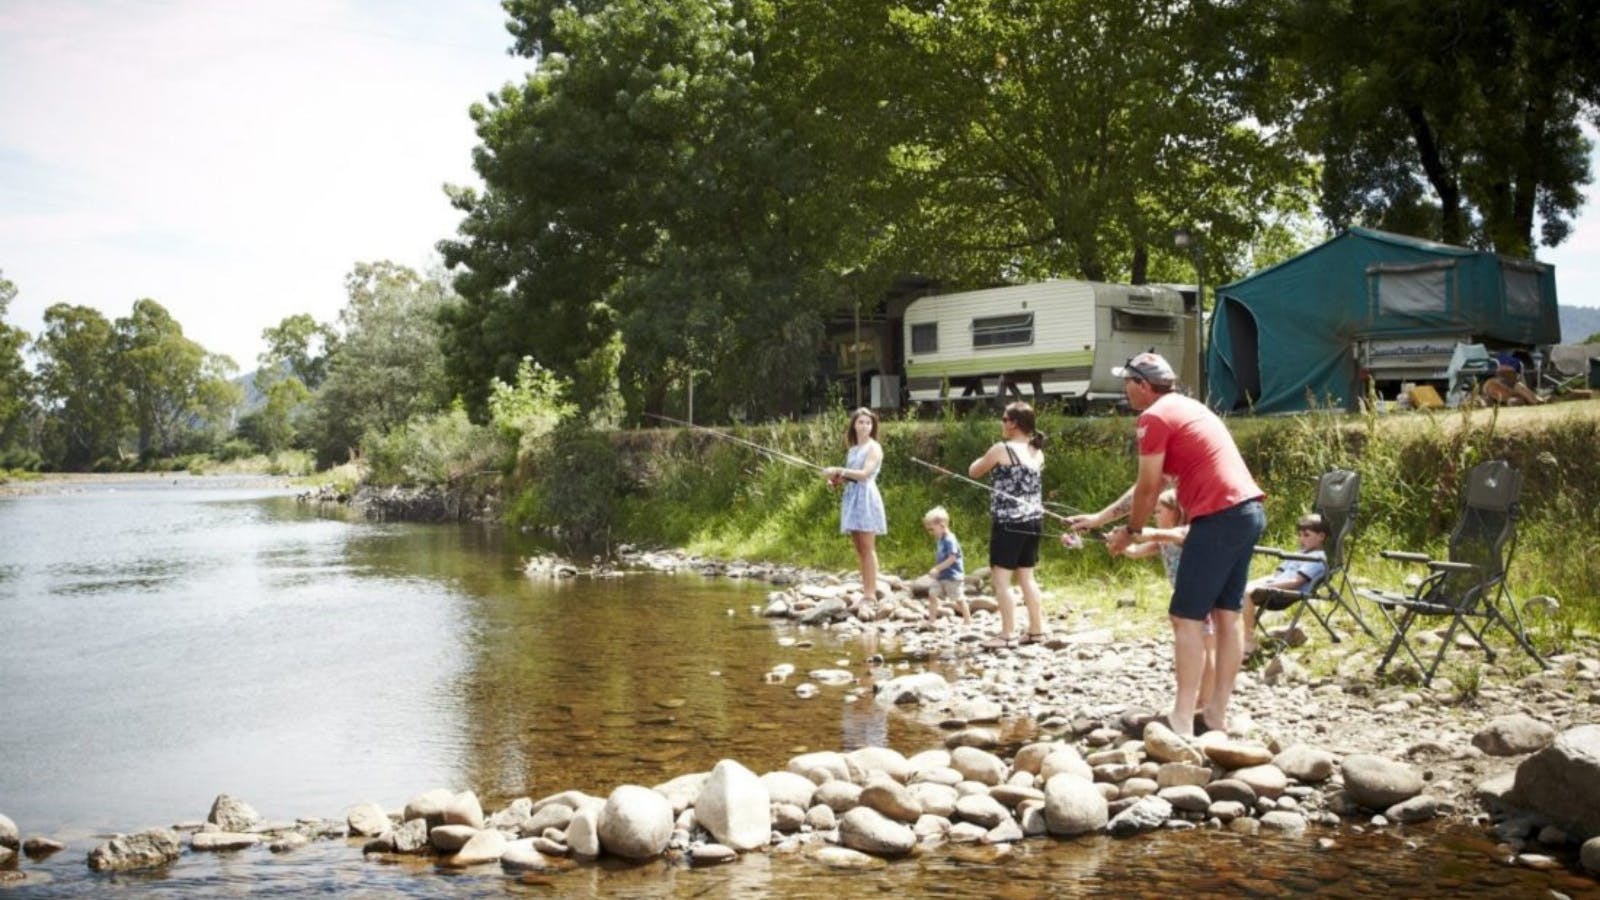 Family of 5 fishing from rocky riverbank, campers and caravans, trees, grass, sunny day